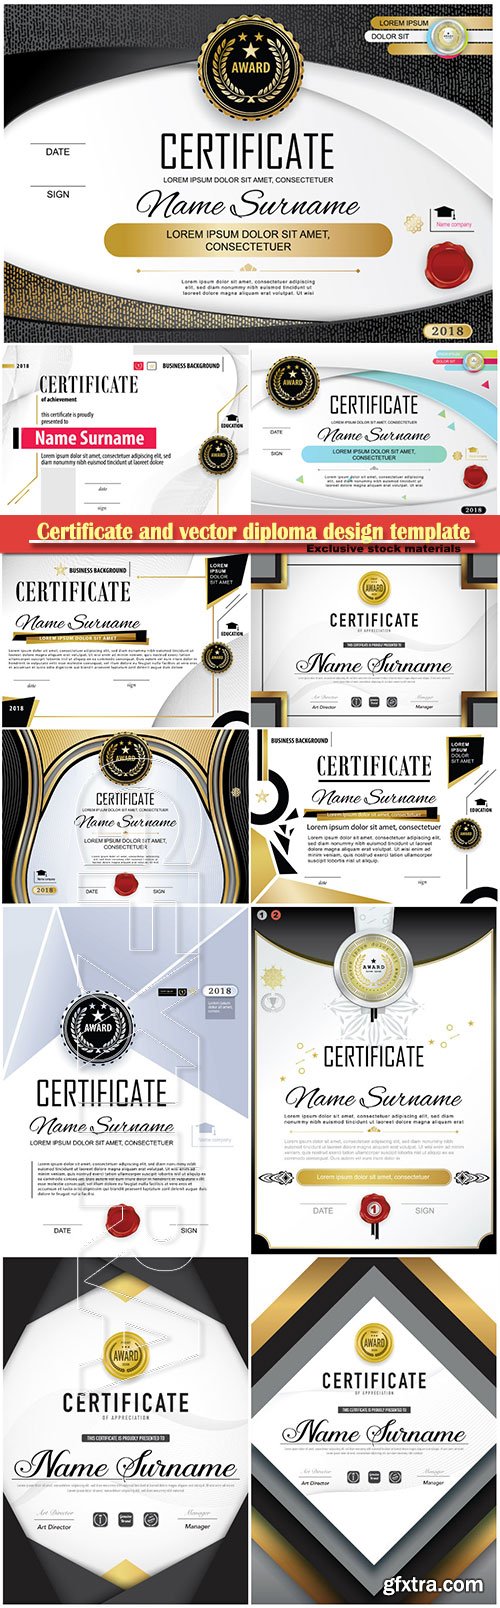 Certificate and vector diploma design template # 53